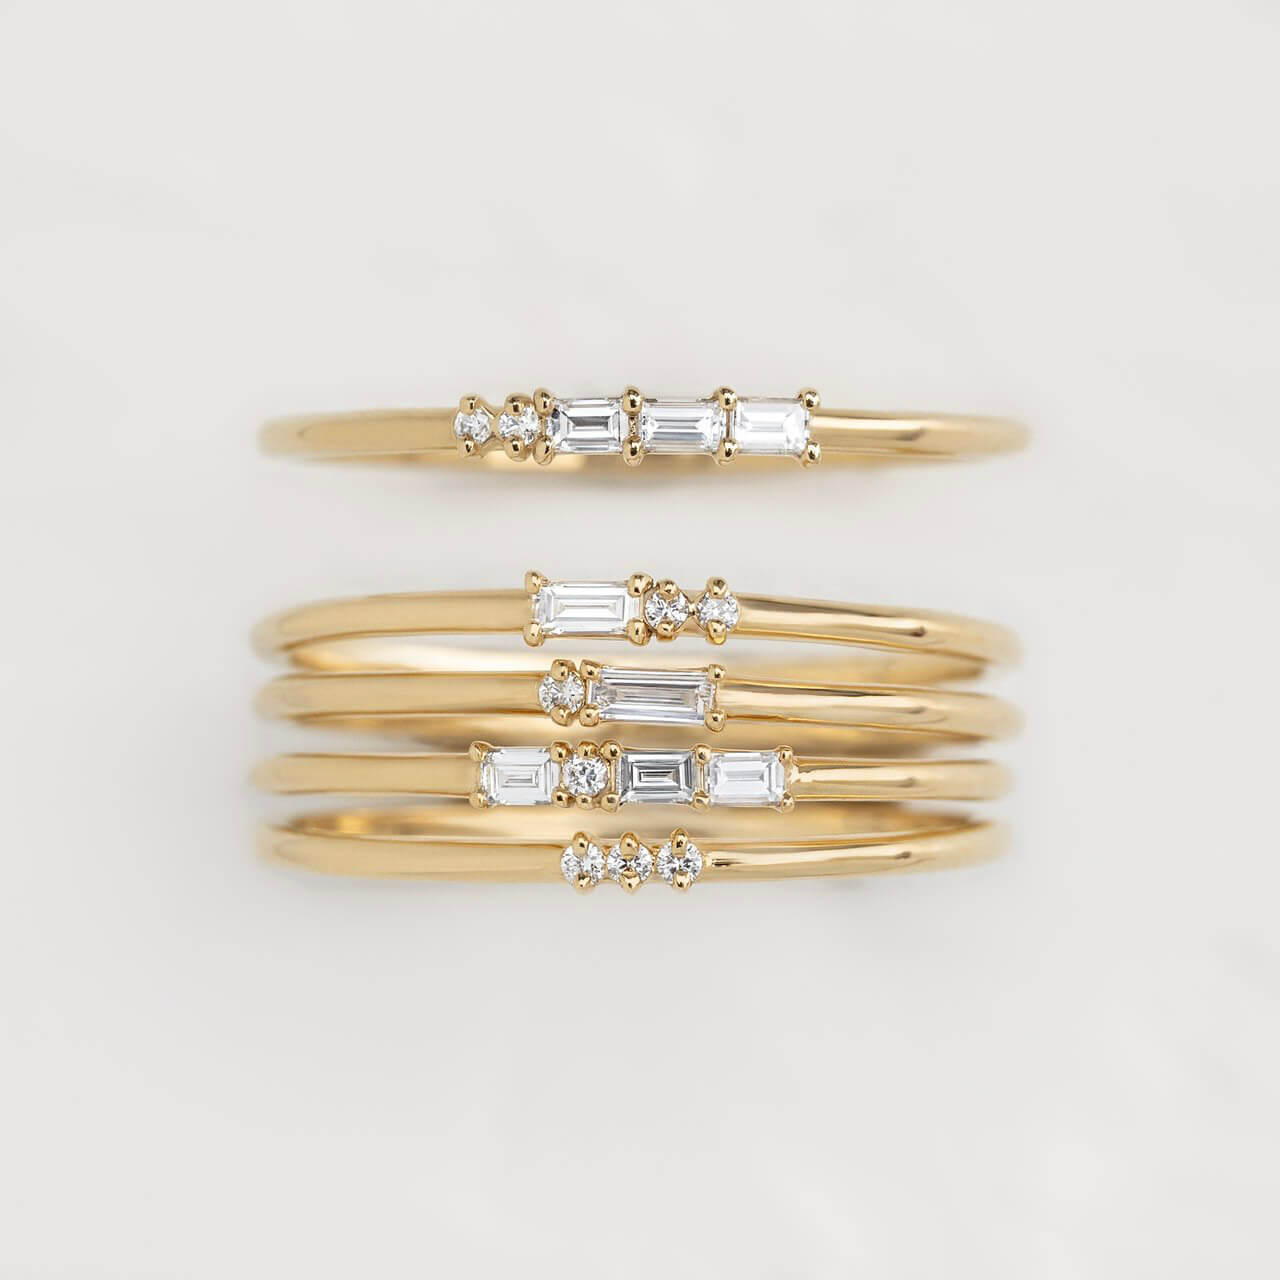 Morse Code Ring, Yellow Gold - Letter "K"